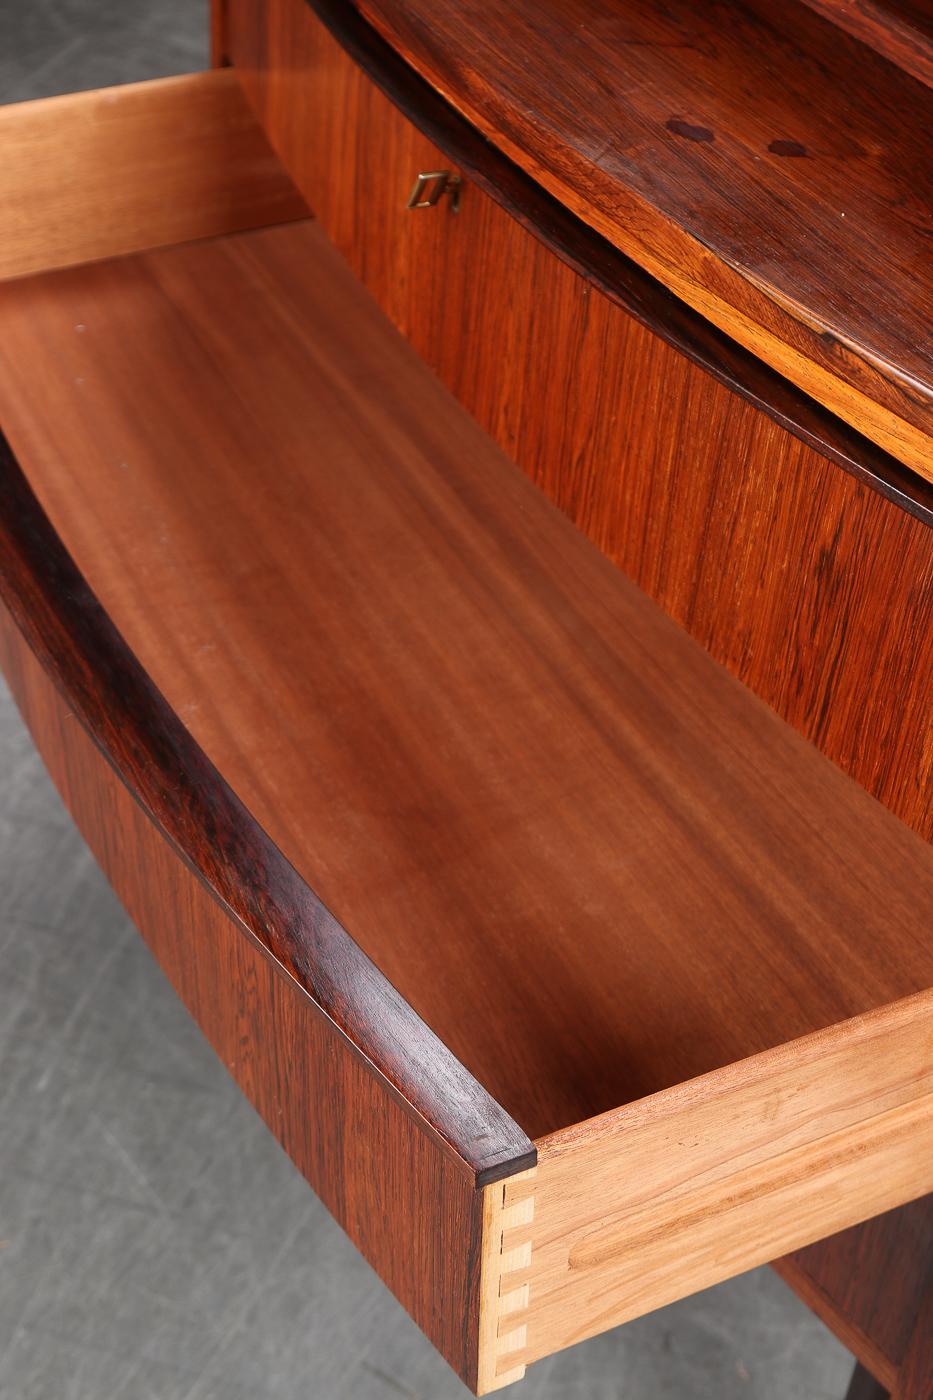 Lacquered Danish Modern Midcentury Bow Front Secretary Desk in Rosewood